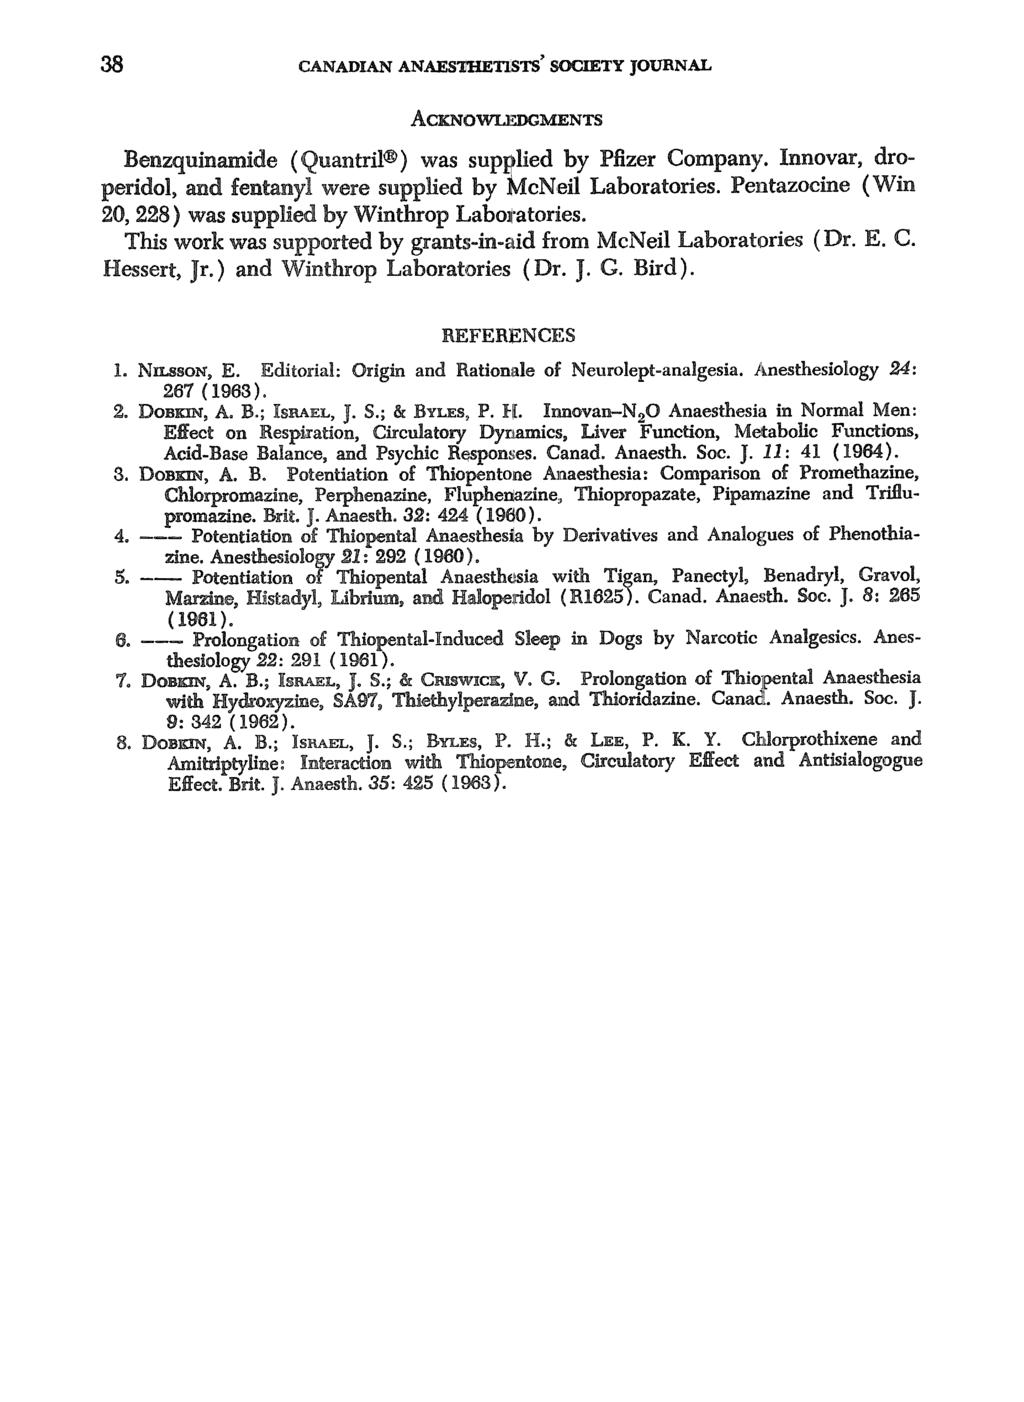 38 CANADIAN ANAESTHETISTS' SOCIETY JOURNAL ACKNOWLFA~M~.NTS Benzqu/namide (Quantril was supplied by Pfizer Company'. Innovar, droperidol, and fentanyl were suppl/ed by McNeil Laboratories.